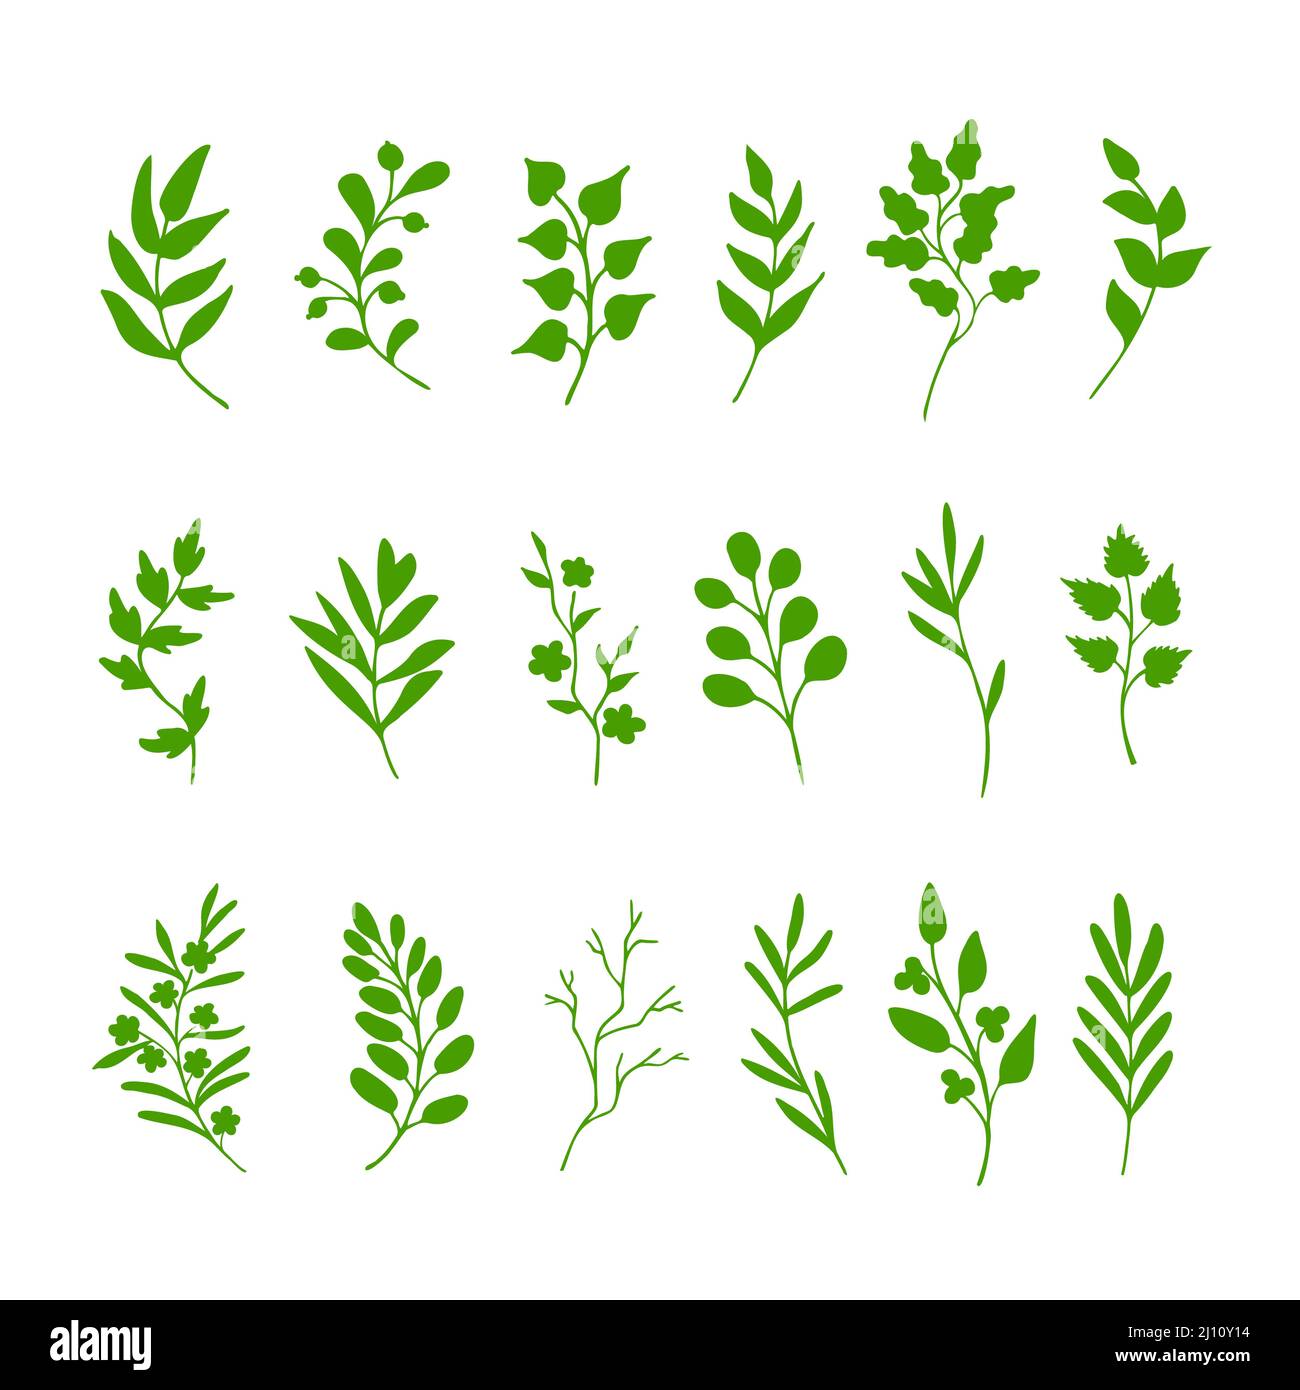 Leaves, herbs, twigs, green silhouettes on white background. Hand drawn design. Eco, bio springtime symbols. Collection of clip art elements Stock Photo